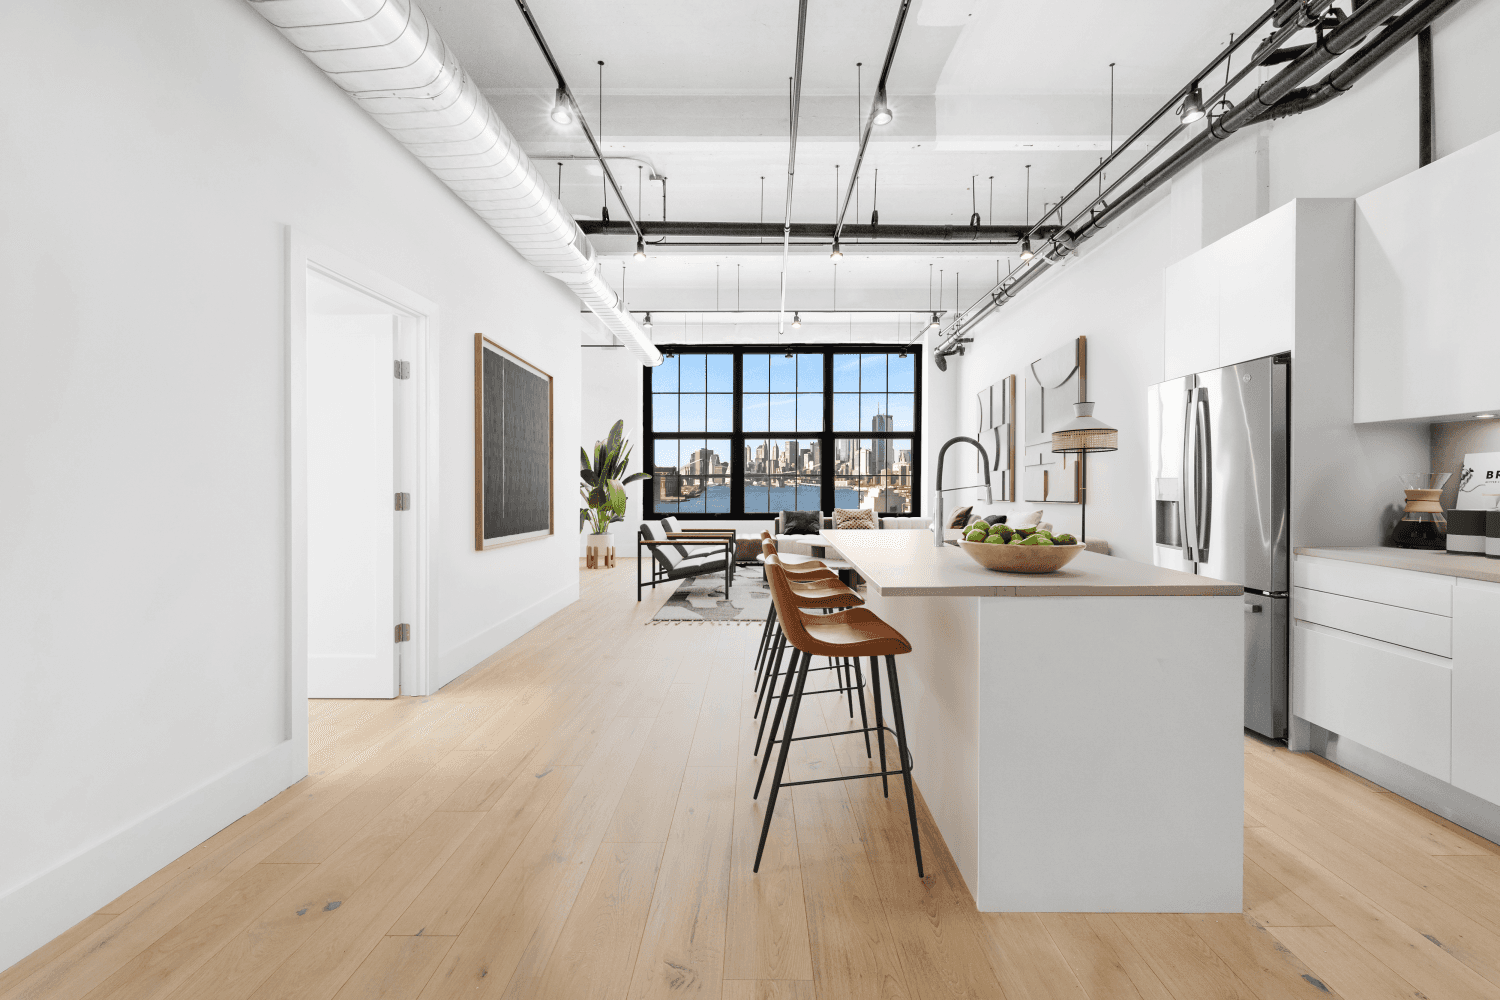 Experience a luxurious rental lifestyle in one of the city's most desirable waterfront neighborhoods in this impeccably crafted 3 bedroom, 3 bathroom South and West facing corner apartment at Williamsburg ...